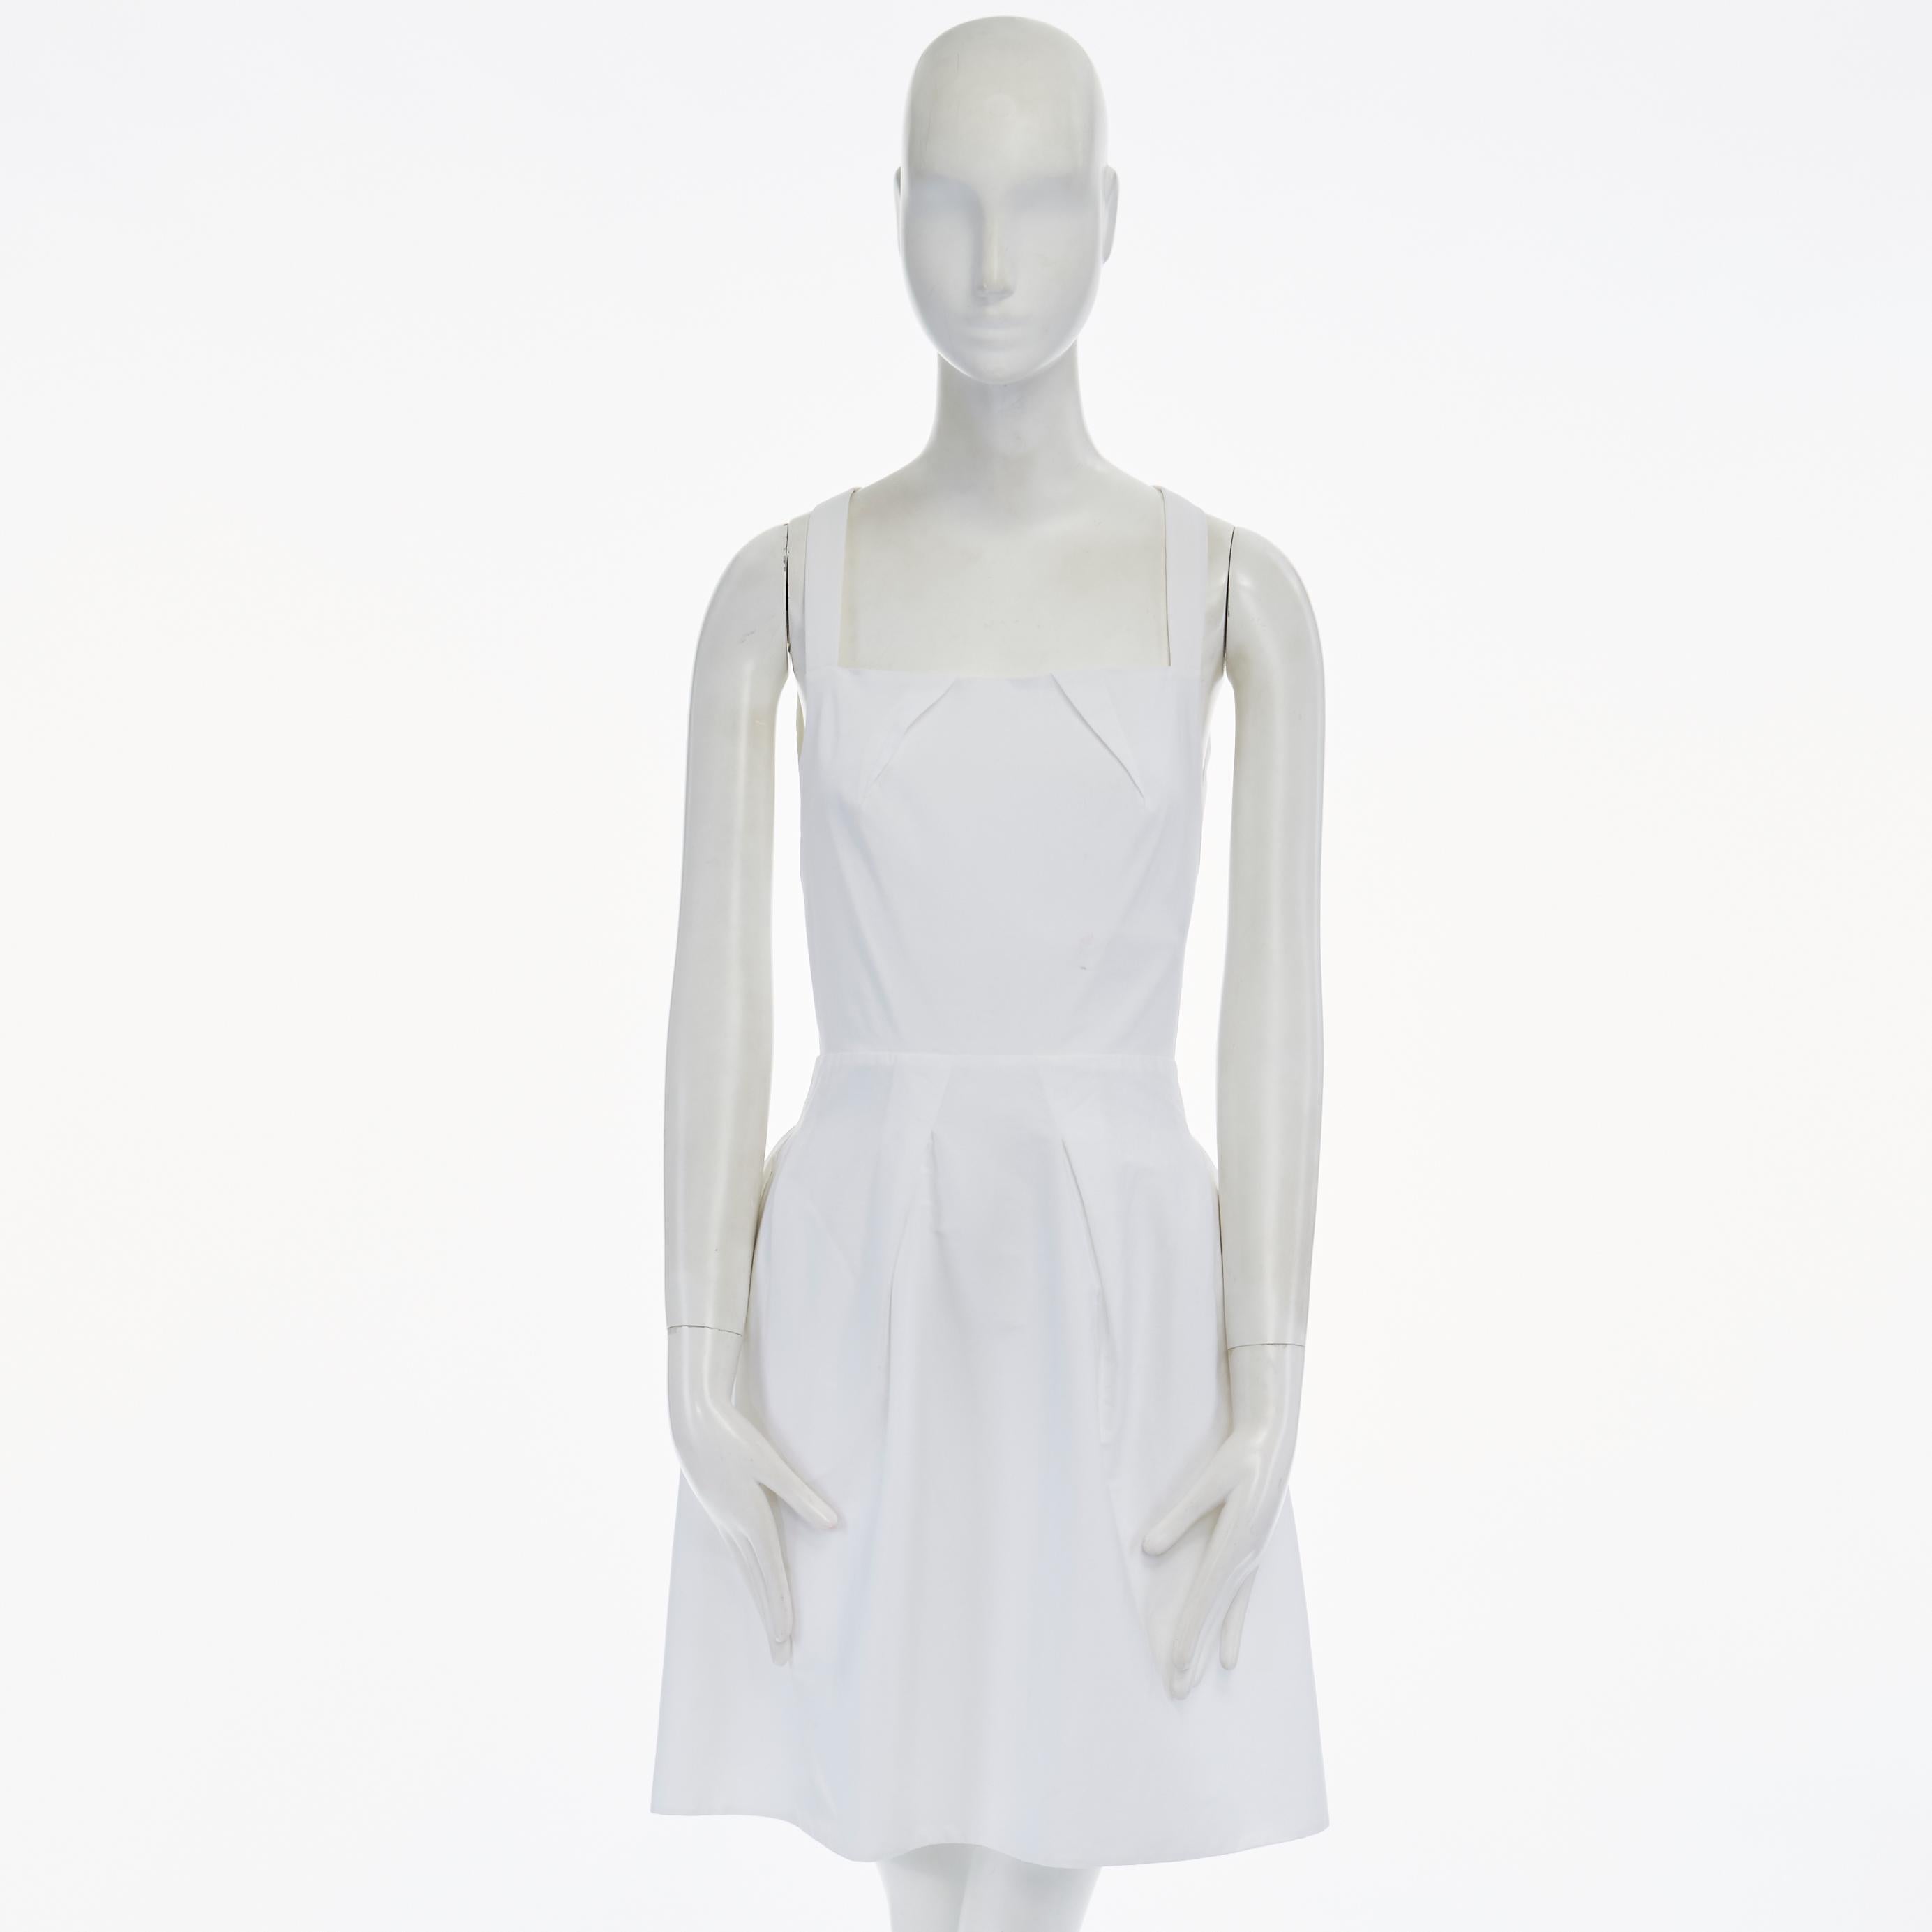 ROLAND MOURET white cotton blend origami pleat dart cut out back dress UK8 Reference: LNKO/A00415 
Brand: Roland Mouret 
Designer: Roland Mouret 
Material: Cotton 
Color: White 
Pattern: Solid 
Closure: Zip 
Made in: Portugal 

CONDITION: